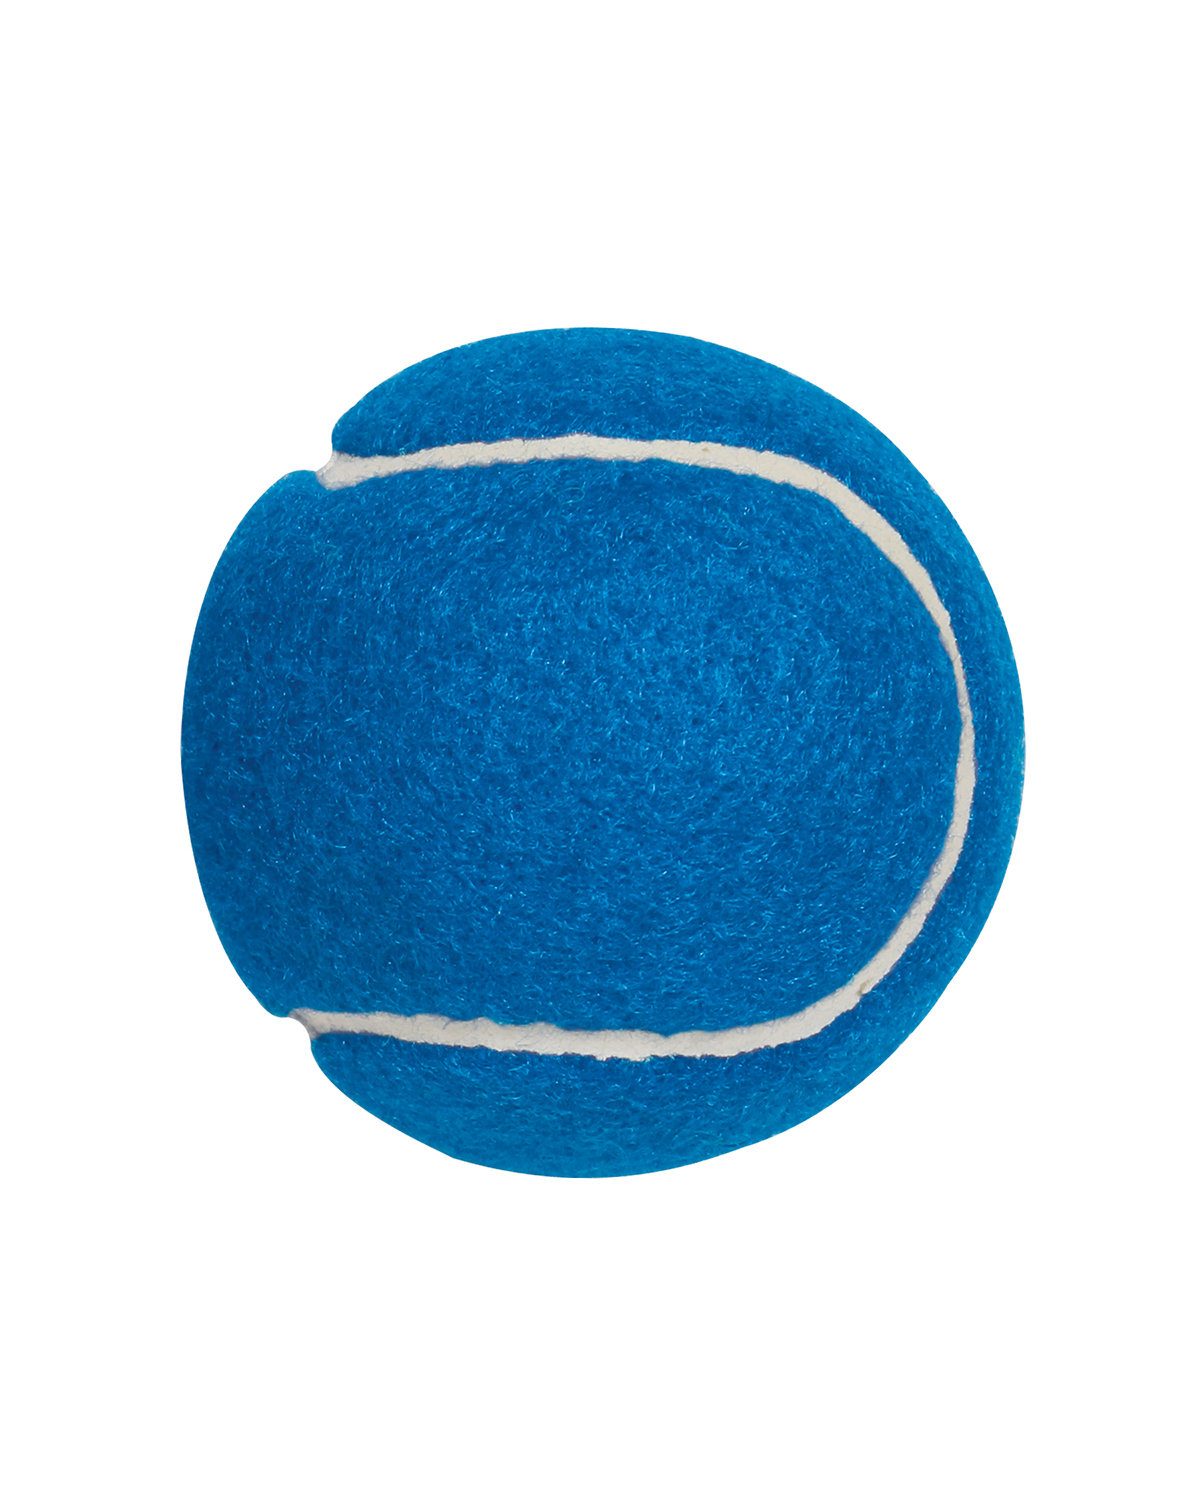 Prime Line Synthetic Promotional Tennis Ball blue 